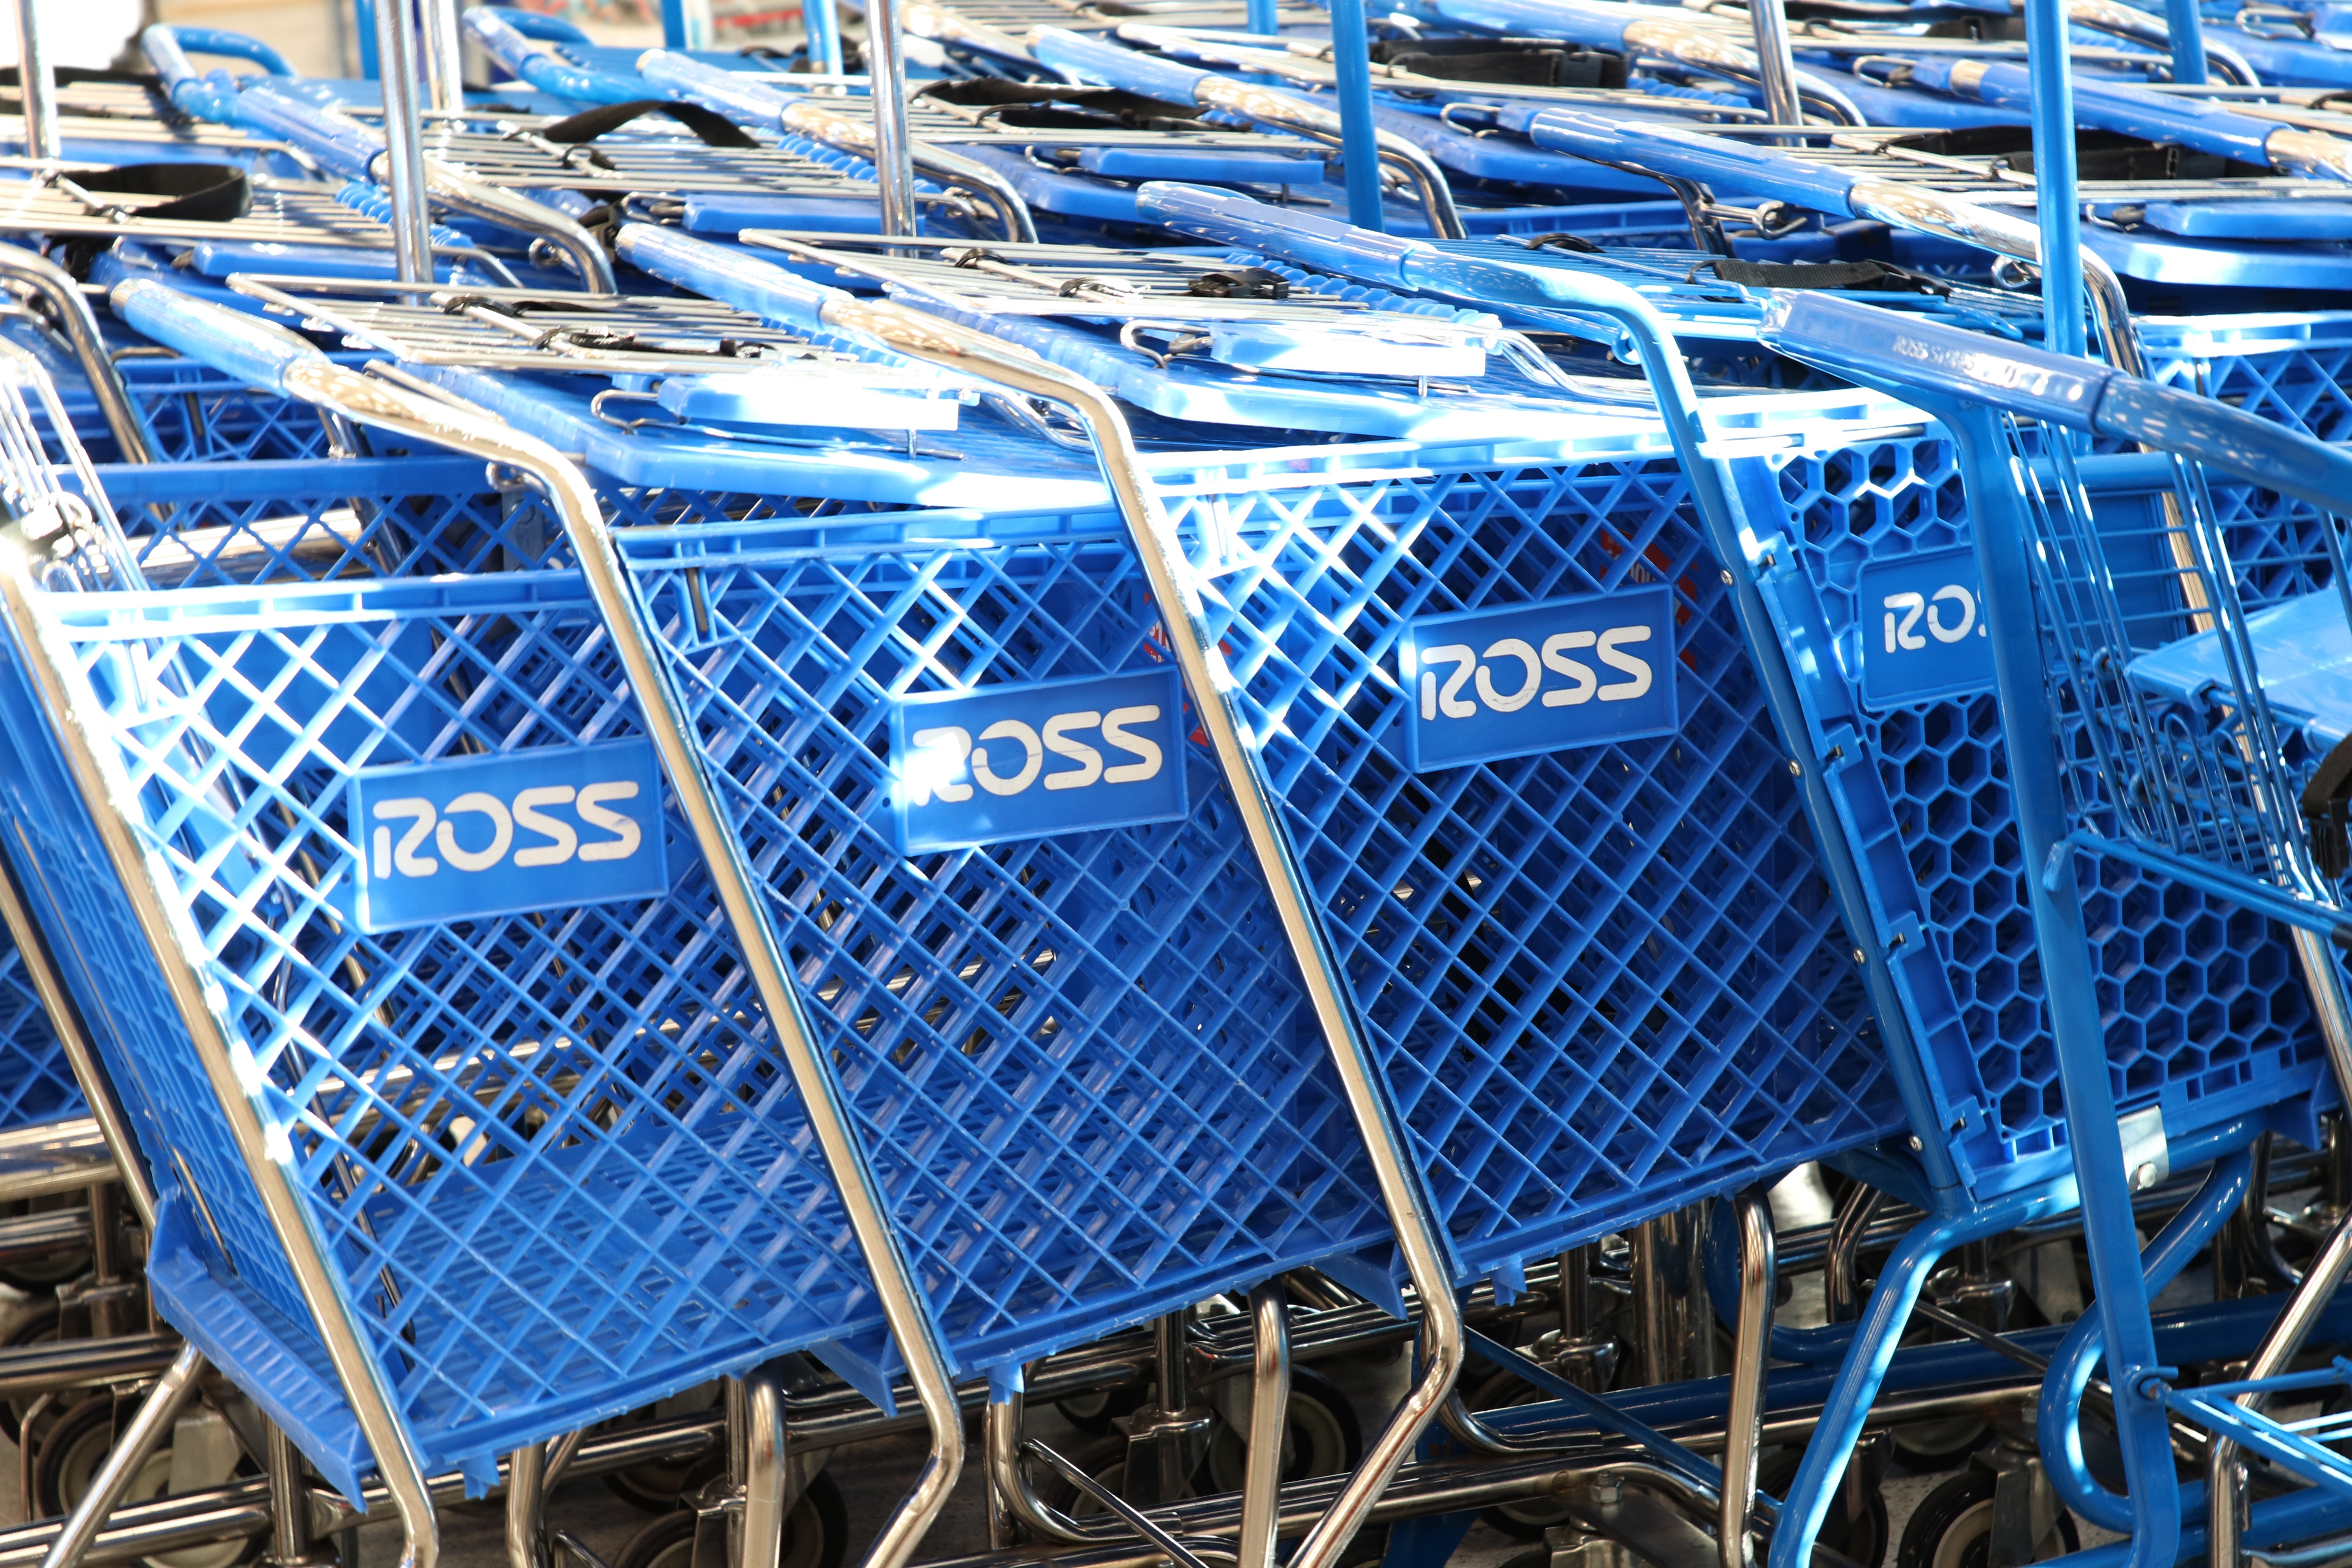 Goldman Sachs Loves Retail Discounters Like Ross Stores — But Not This One Giant Retailer